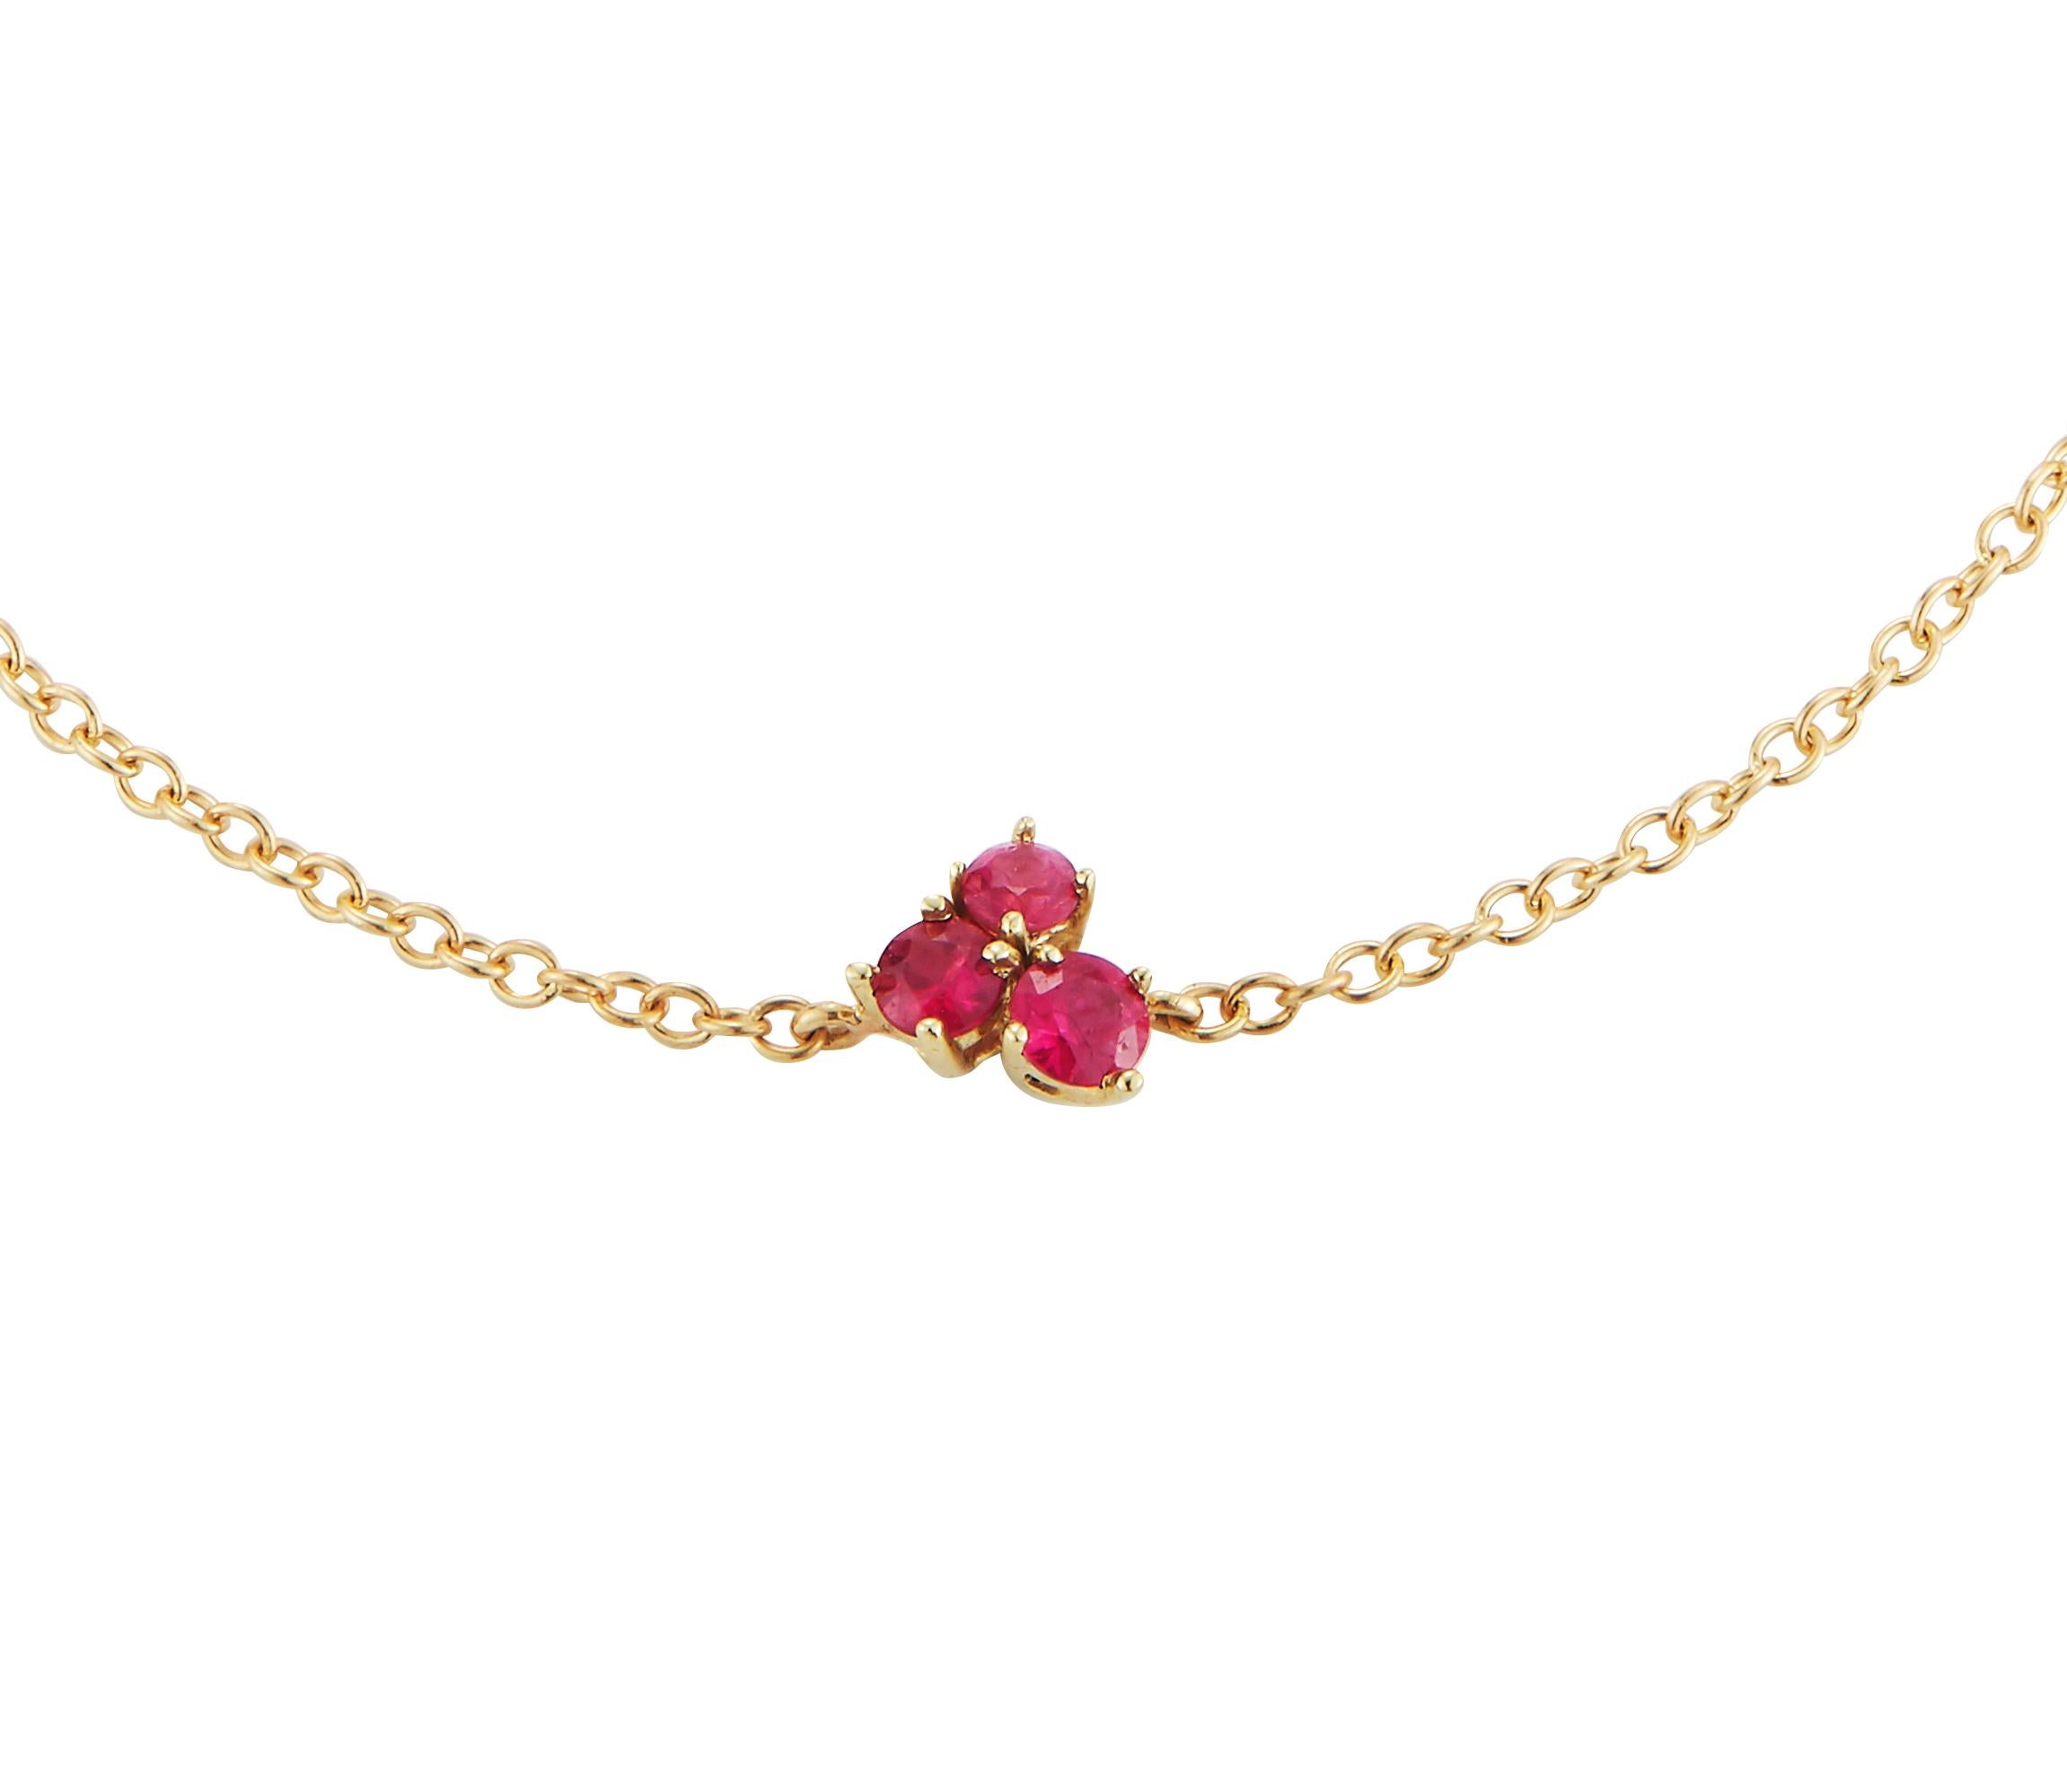 A playful but still classic version of a solitaire bracelet with beautiful rubies.

18k gold 
0.14cts total 
6 mm across, at the widest point
complimentary domestic ground shipping 

NB: All of our jewelry is lovingly hand made in NYC. If we do not